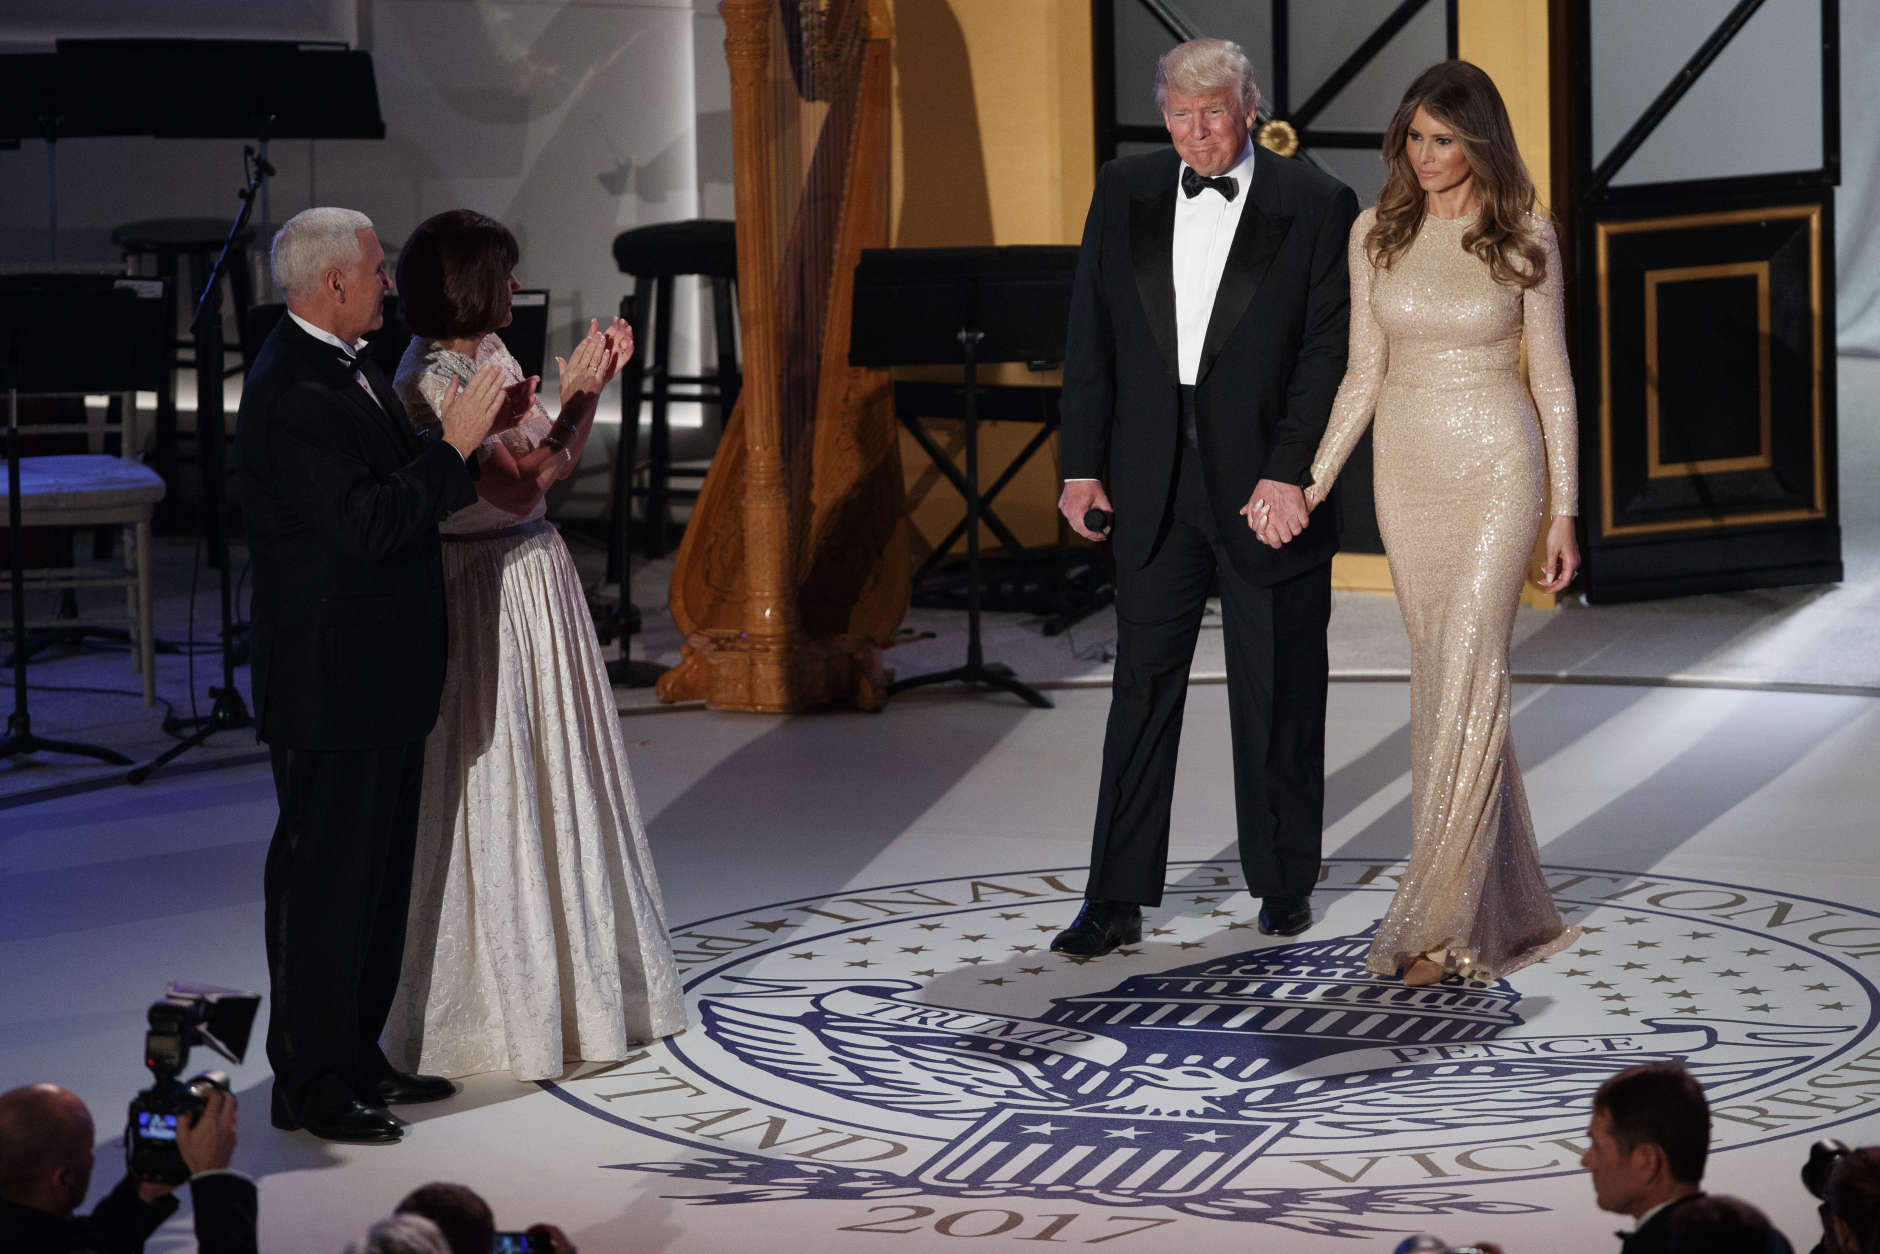 Vice President-elect Mike Pence, left, and his wife Karen, second from left, applaud as President-elect Donald Trump and his wife Melania arrive for a VIP reception and dinner with donors, Thursday, Jan. 19, 2017, in Washington. (AP Photo/Evan Vucci)